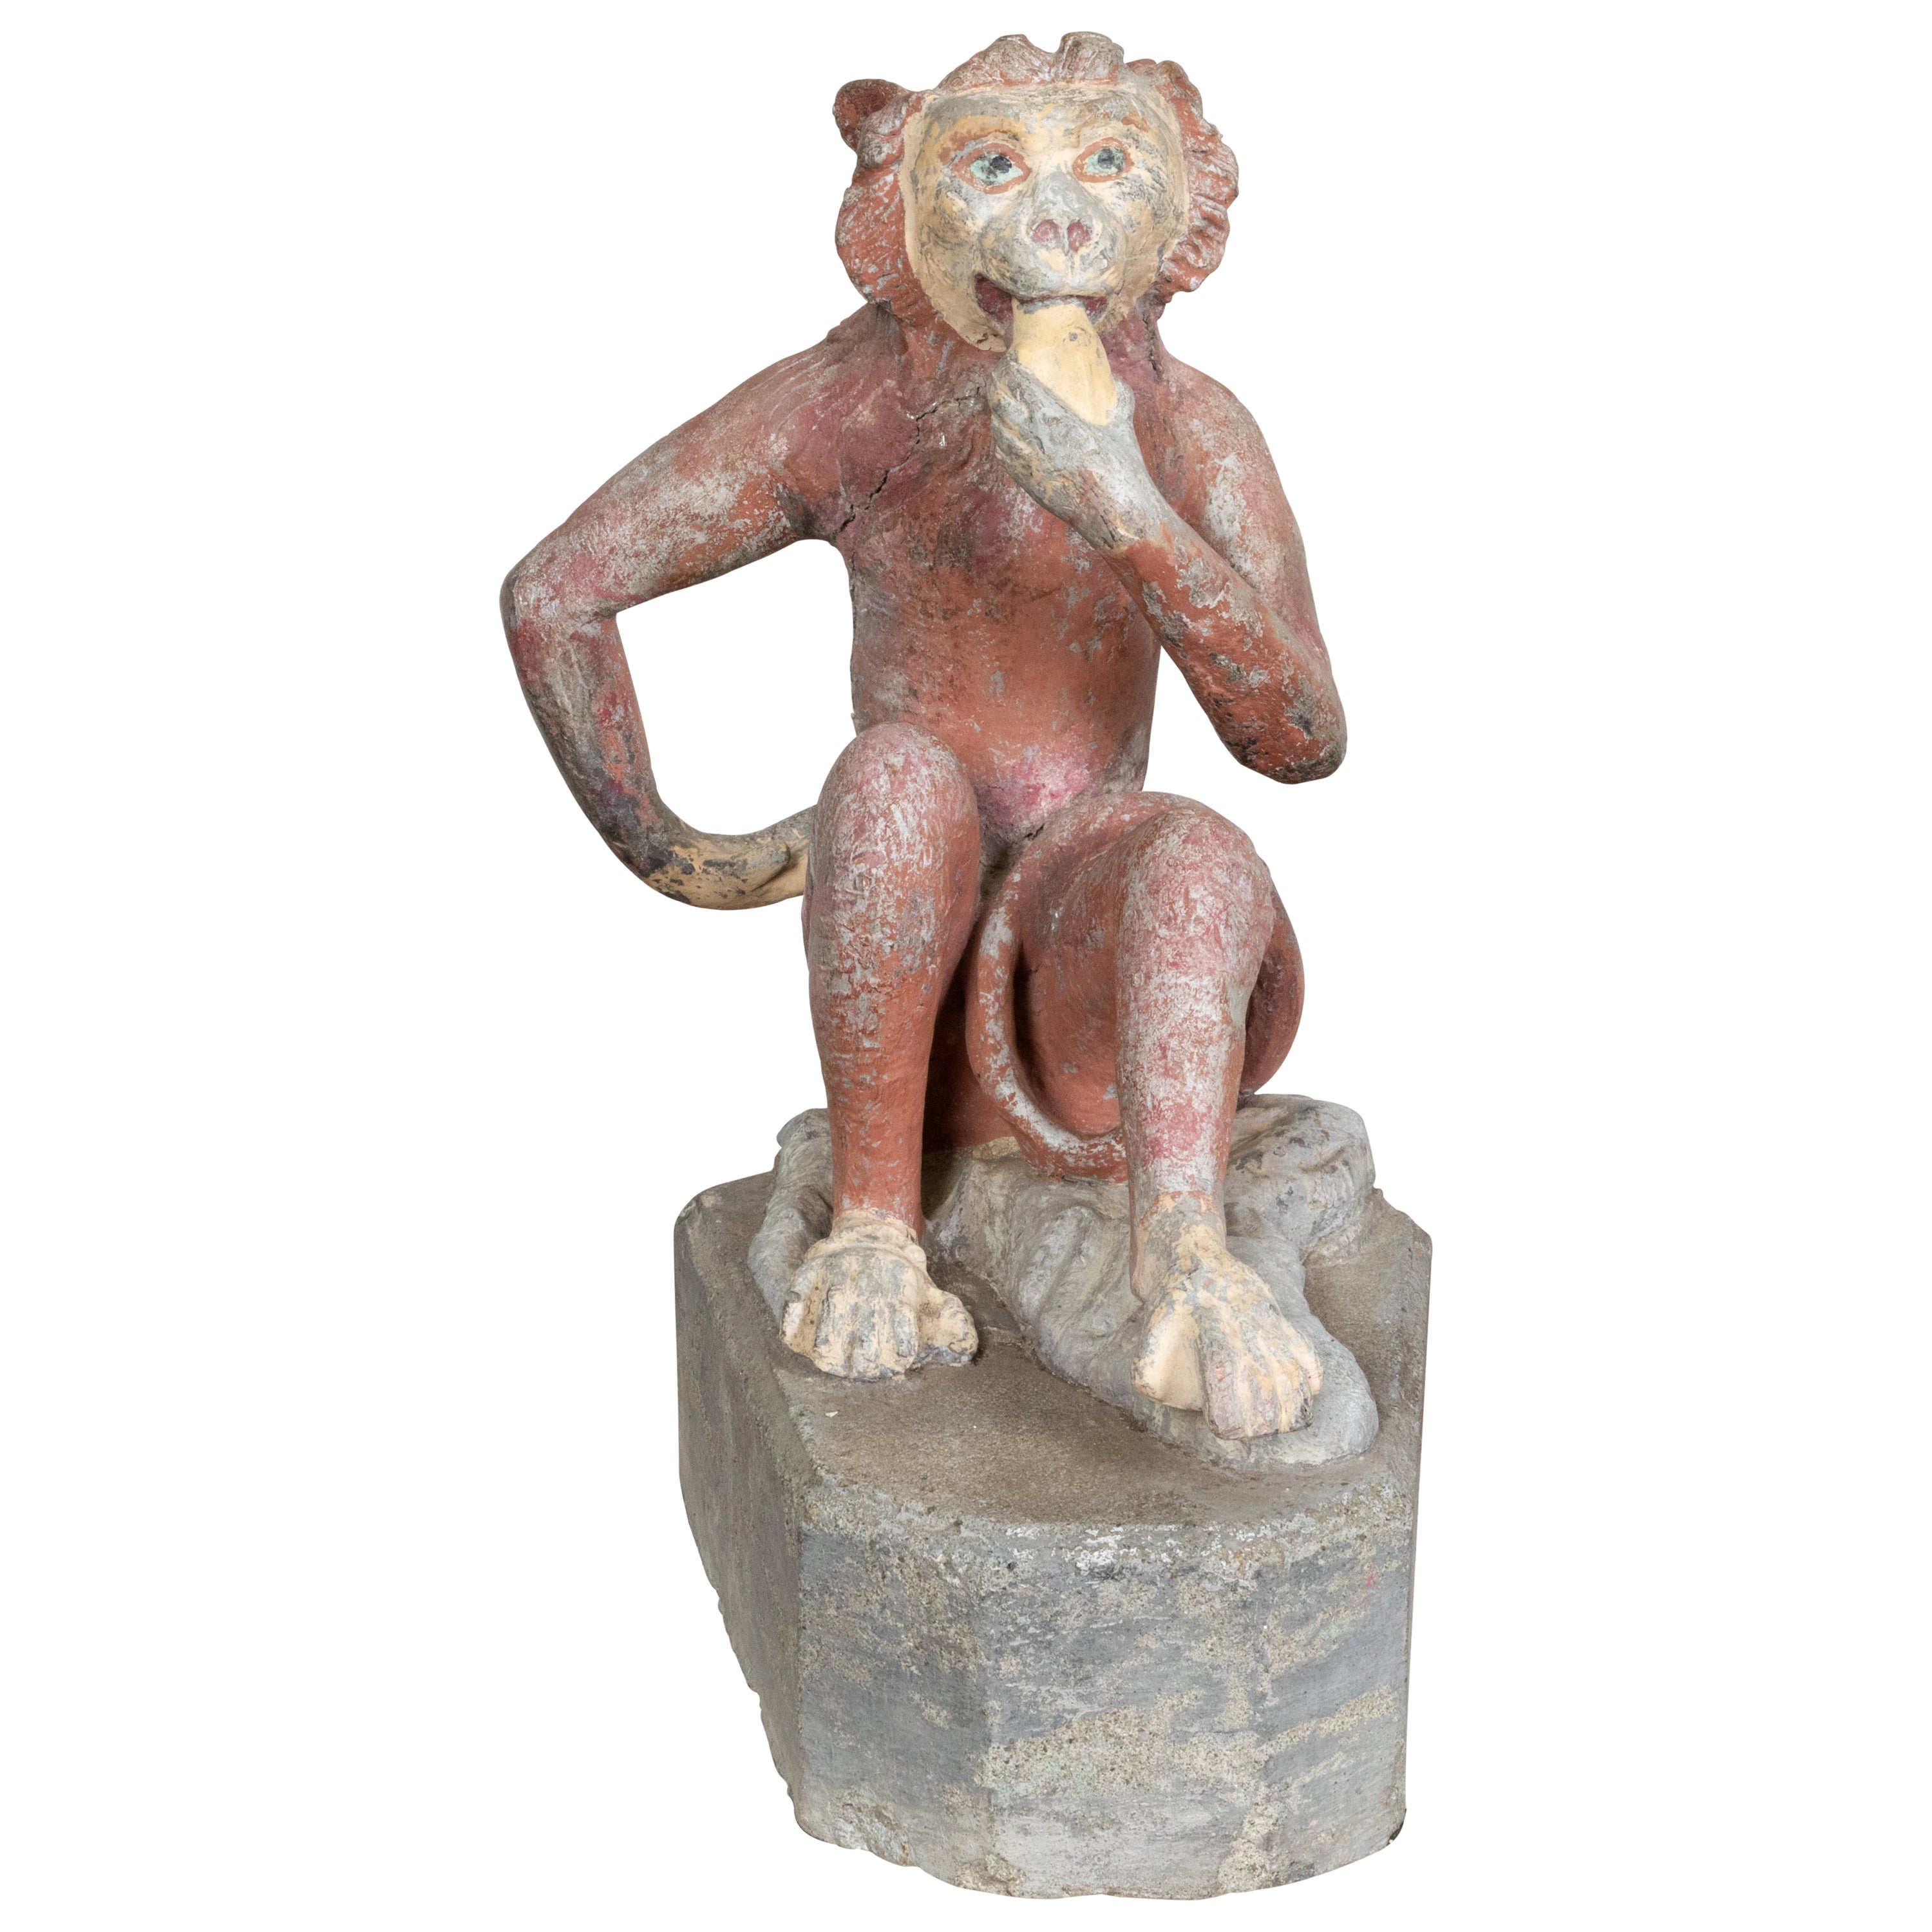 French Midcentury Lead Sculpture of a Monkey Eating a Banana with Aged Patina